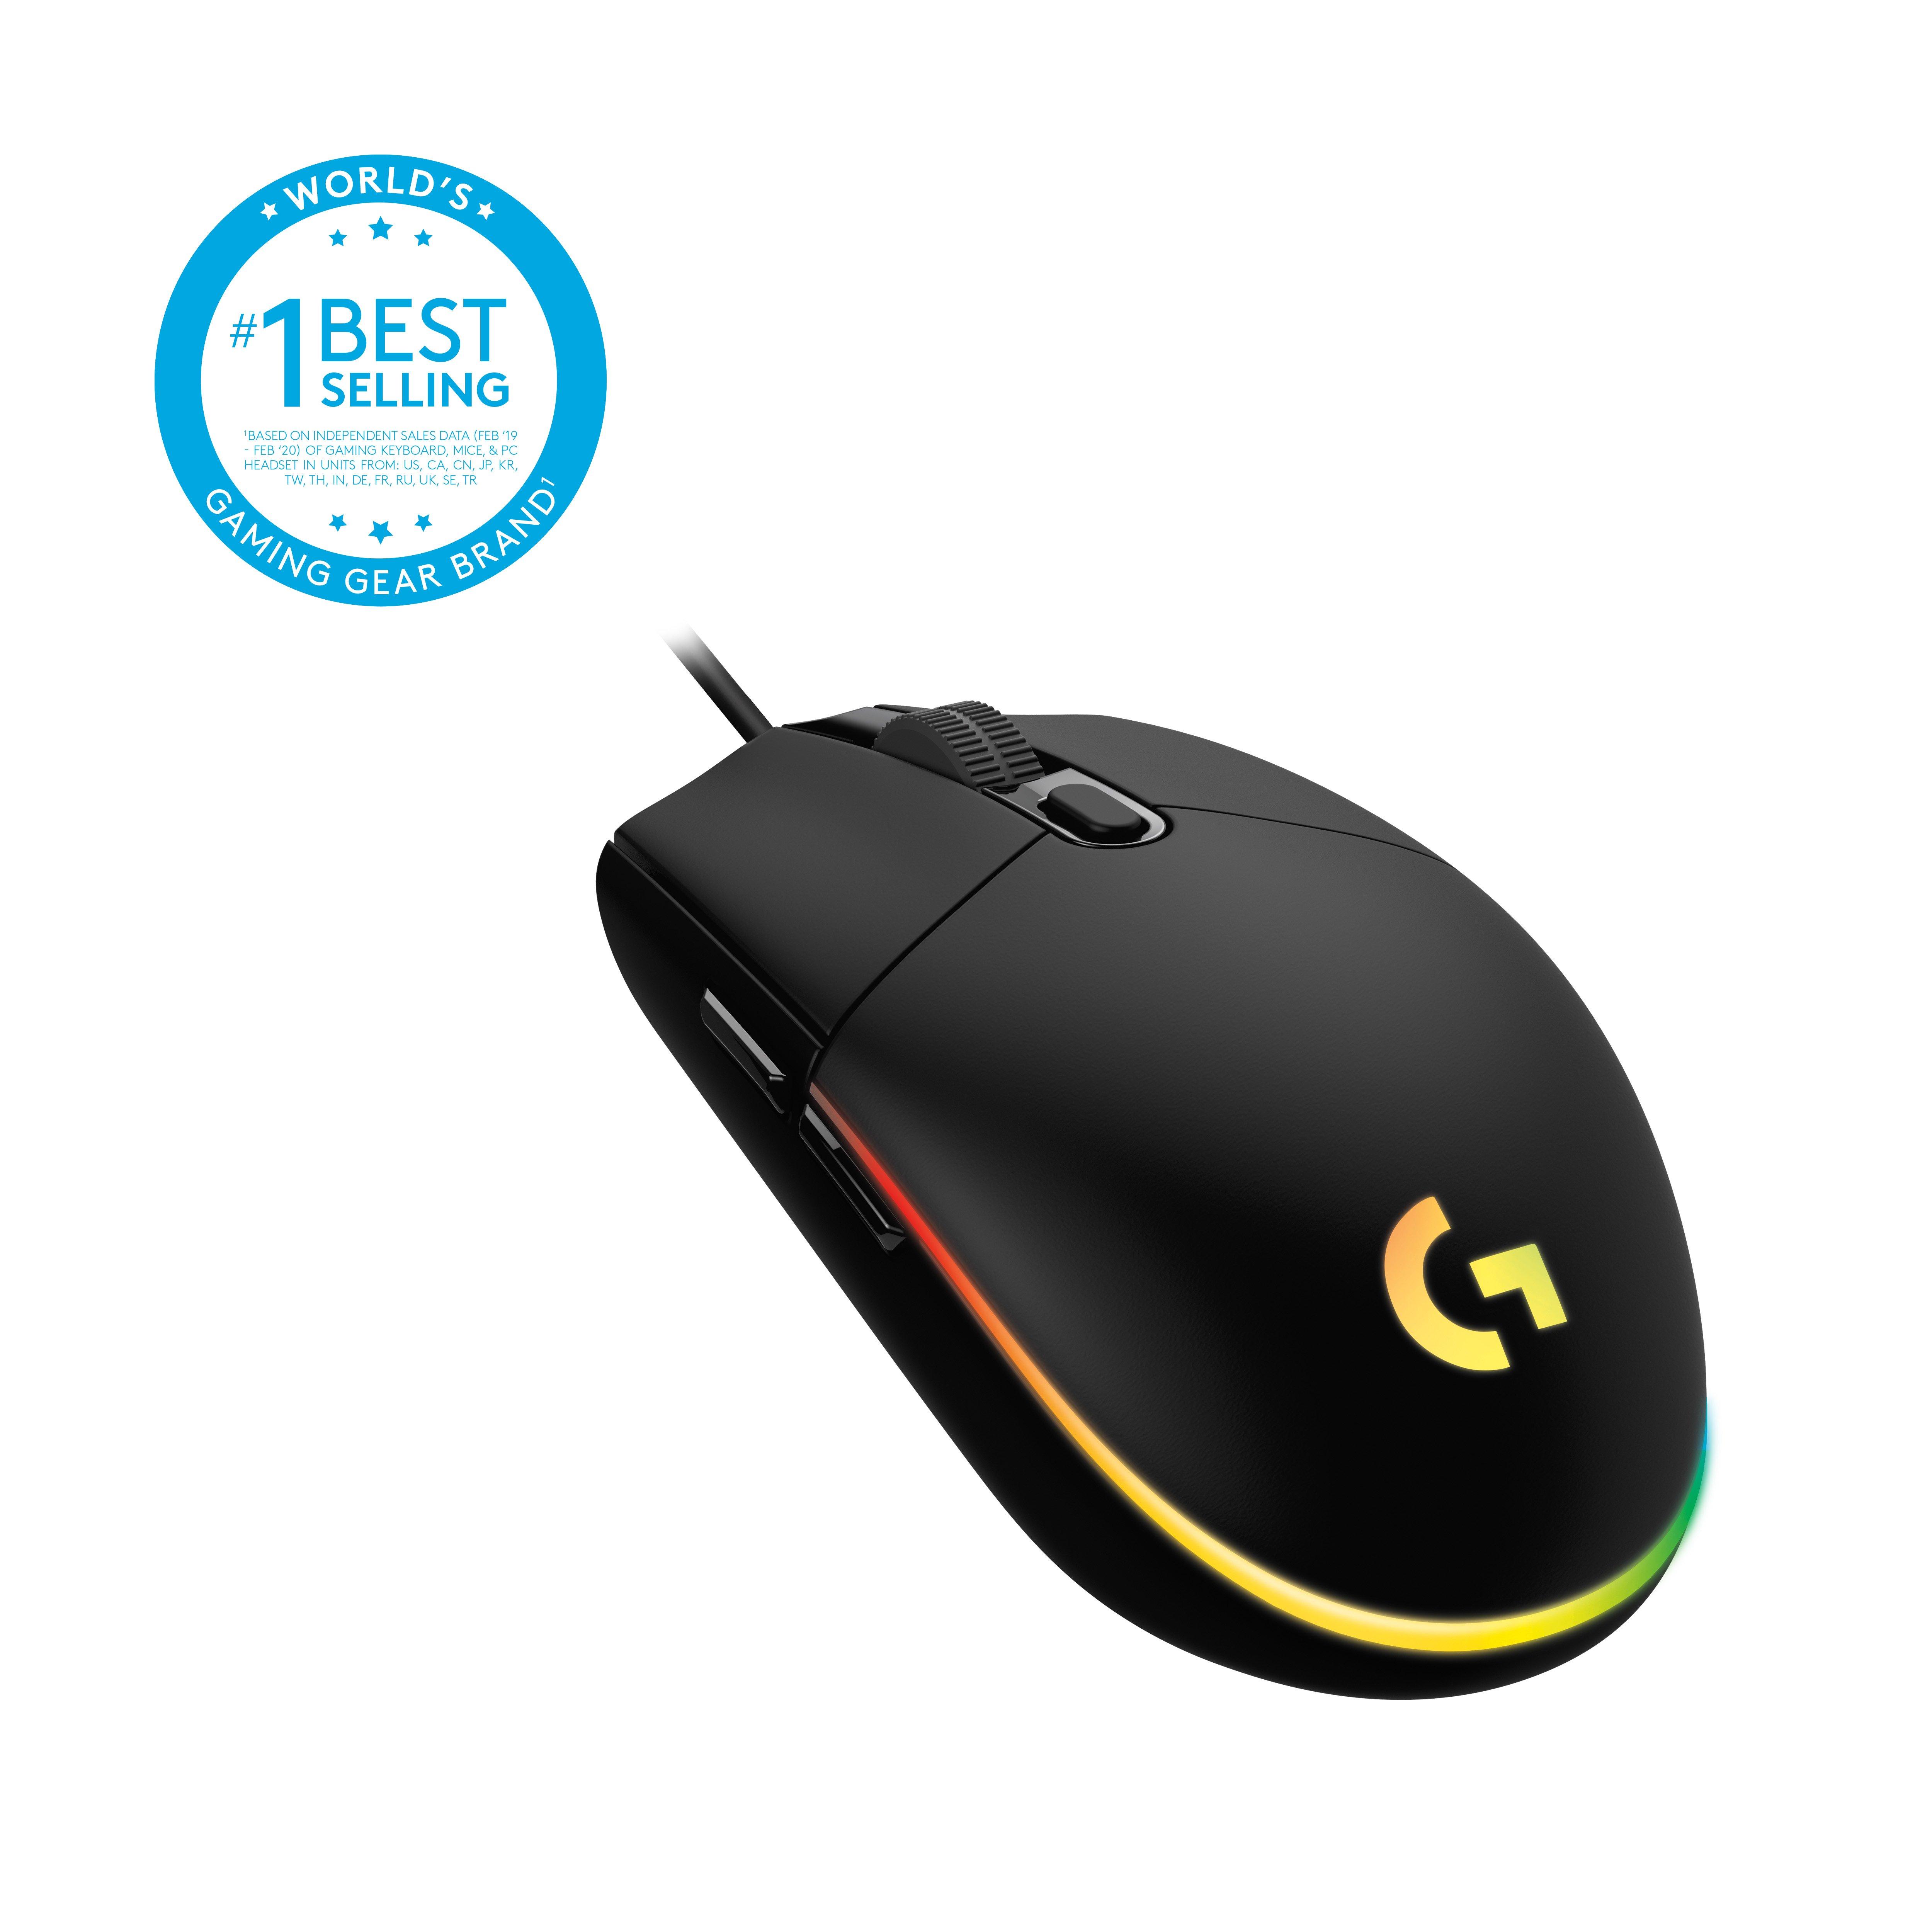 Logitech G203 LIGHTSYNC Wired Gaming Mouse | GameStop